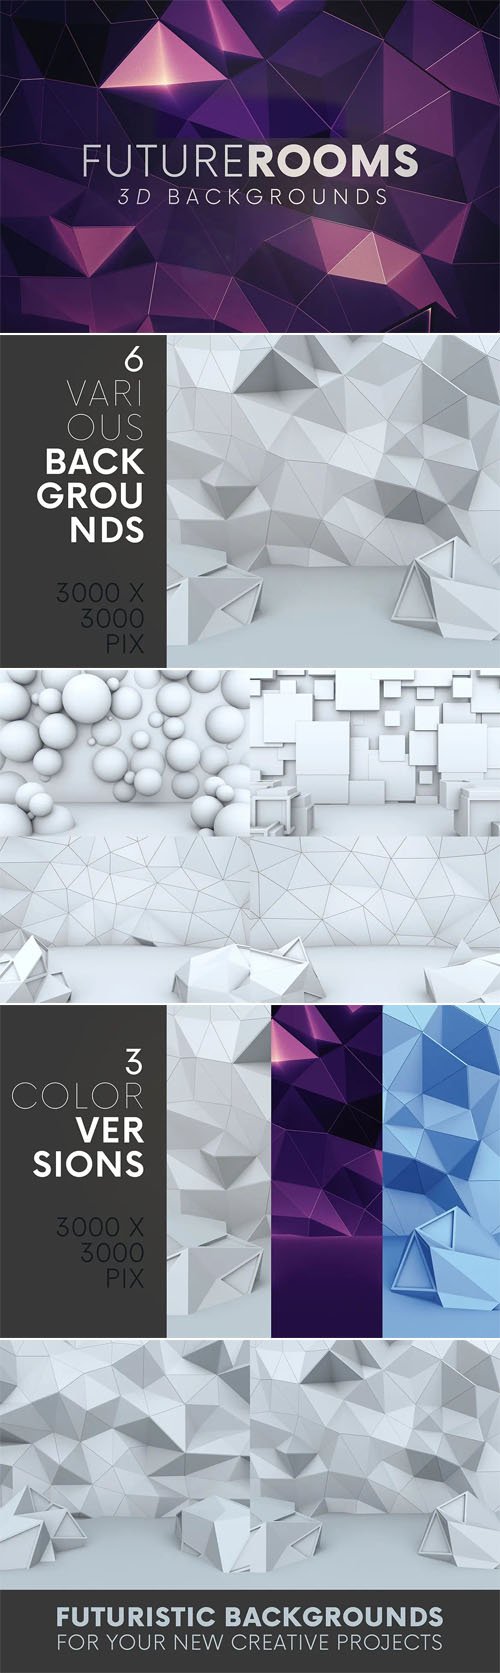 Futuristic Rooms 3D Backgrounds